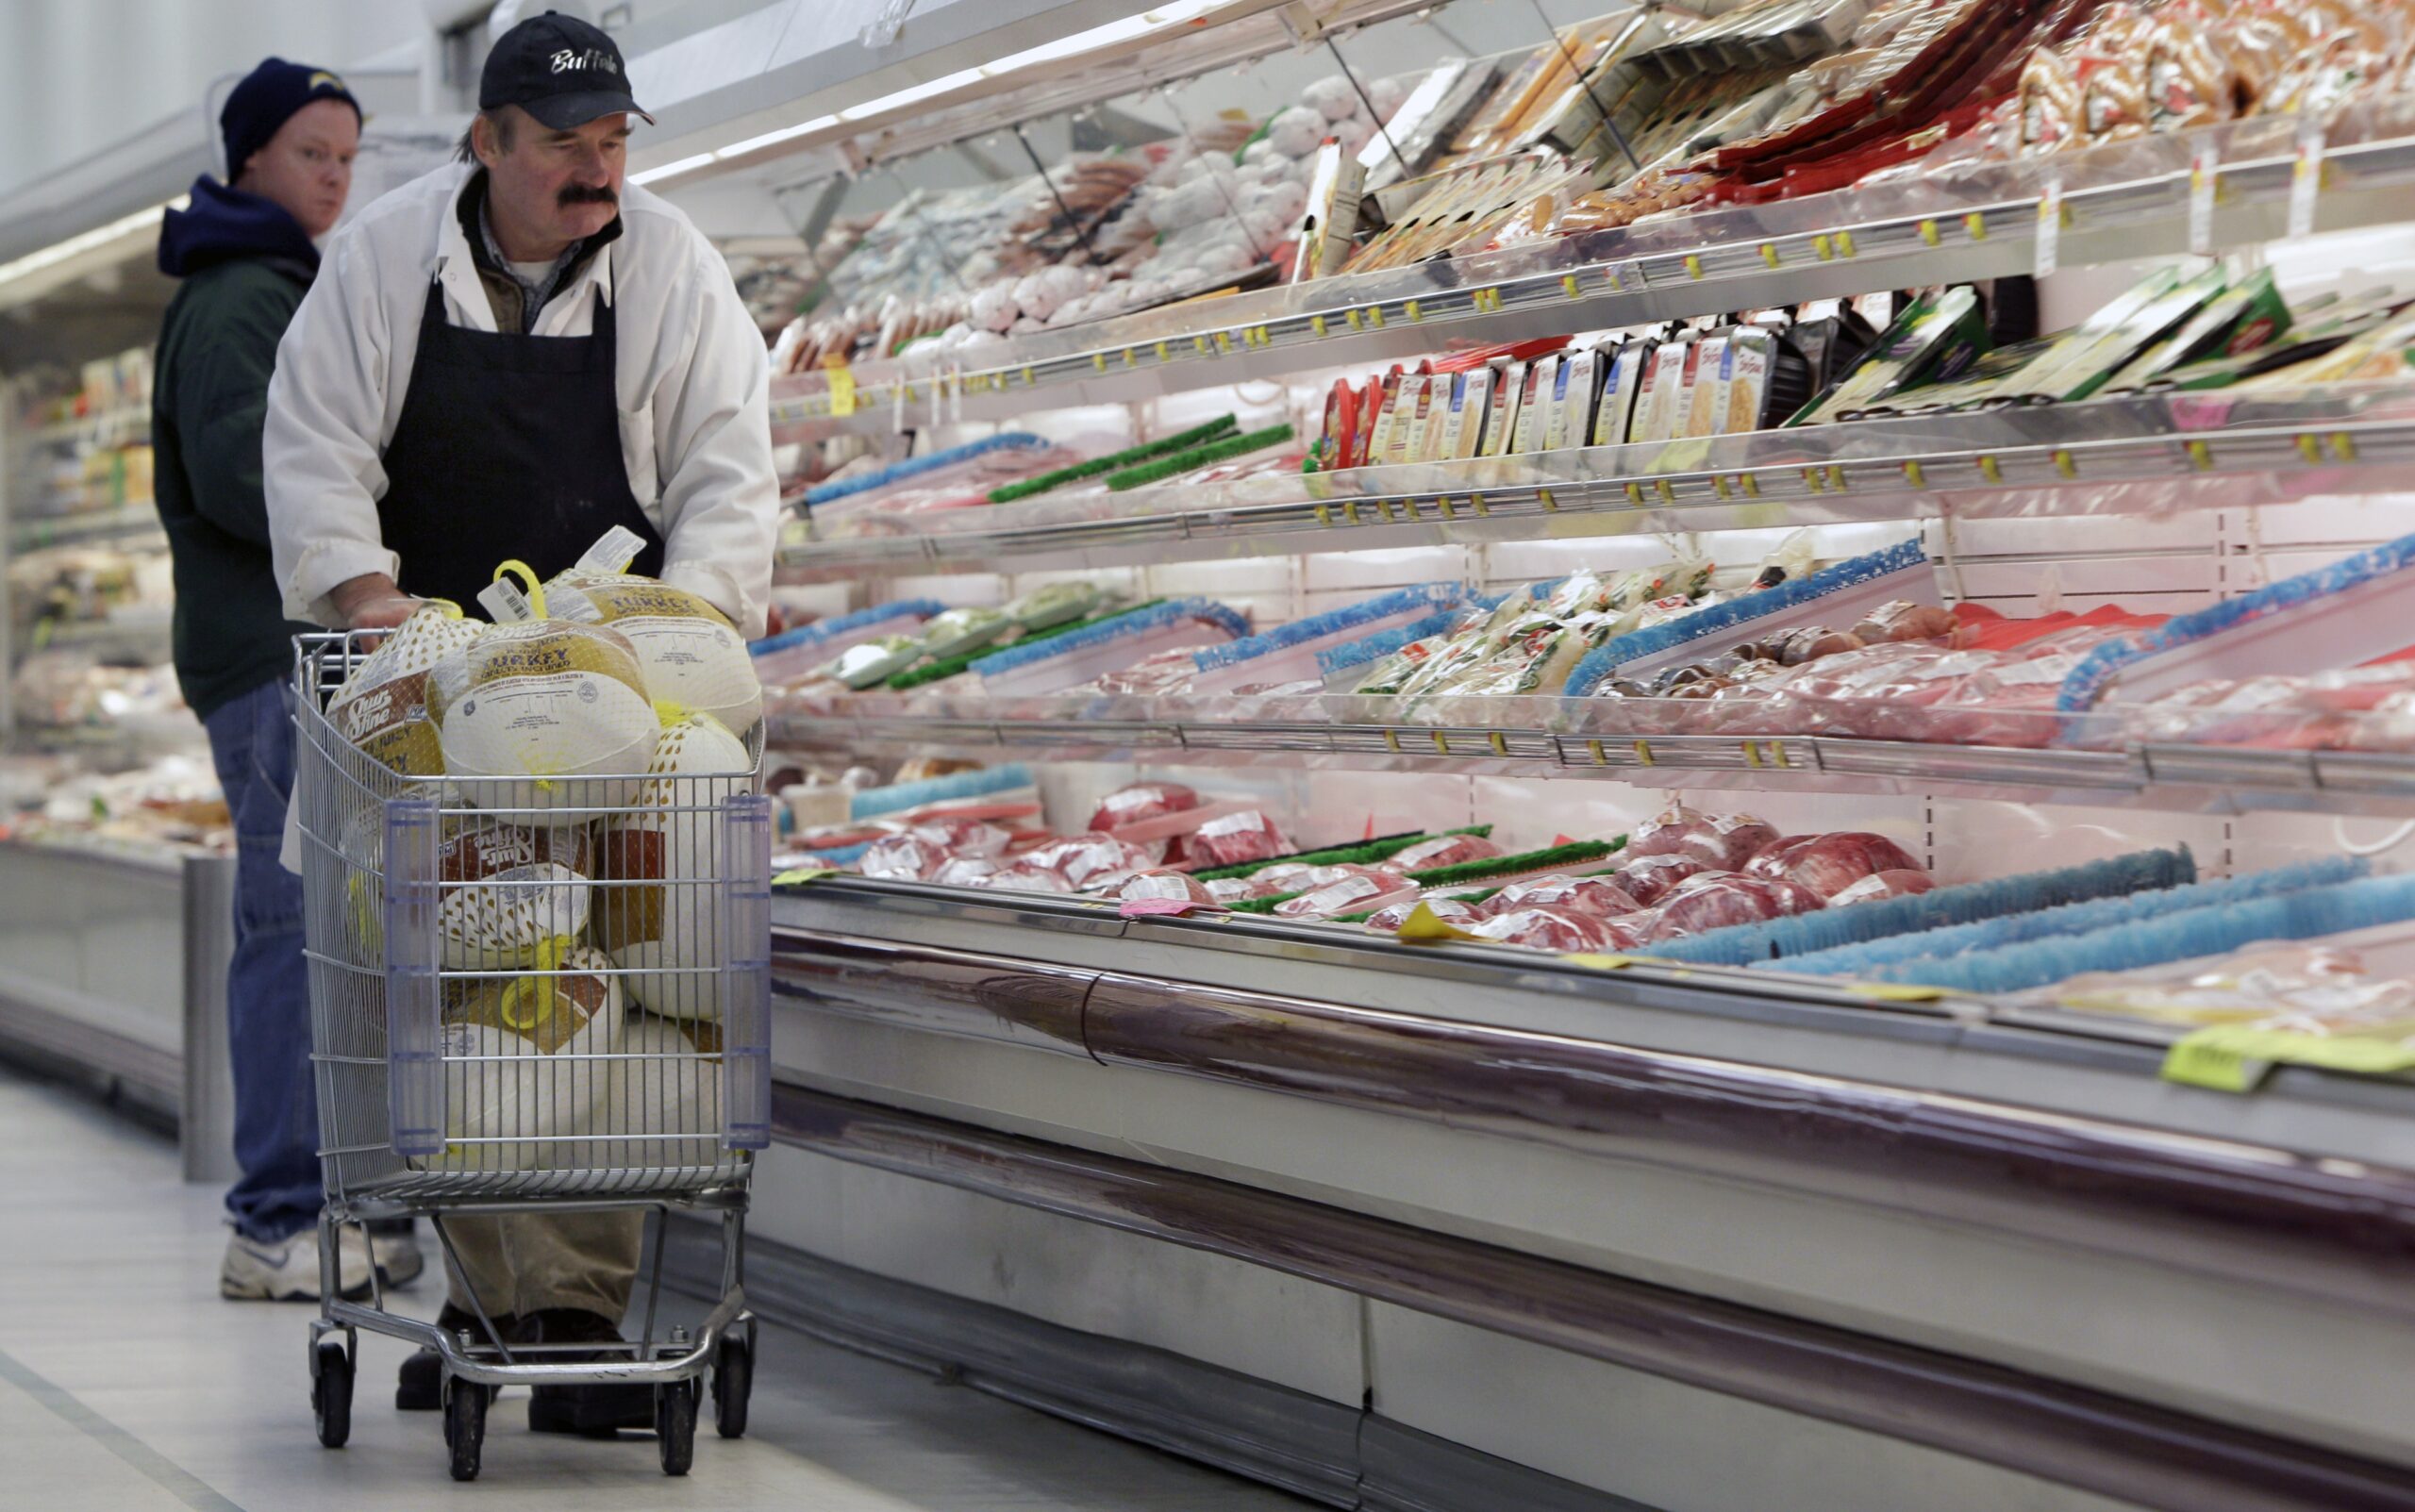 A meat manager, pushes a shopping cart full of turkeys for stocking